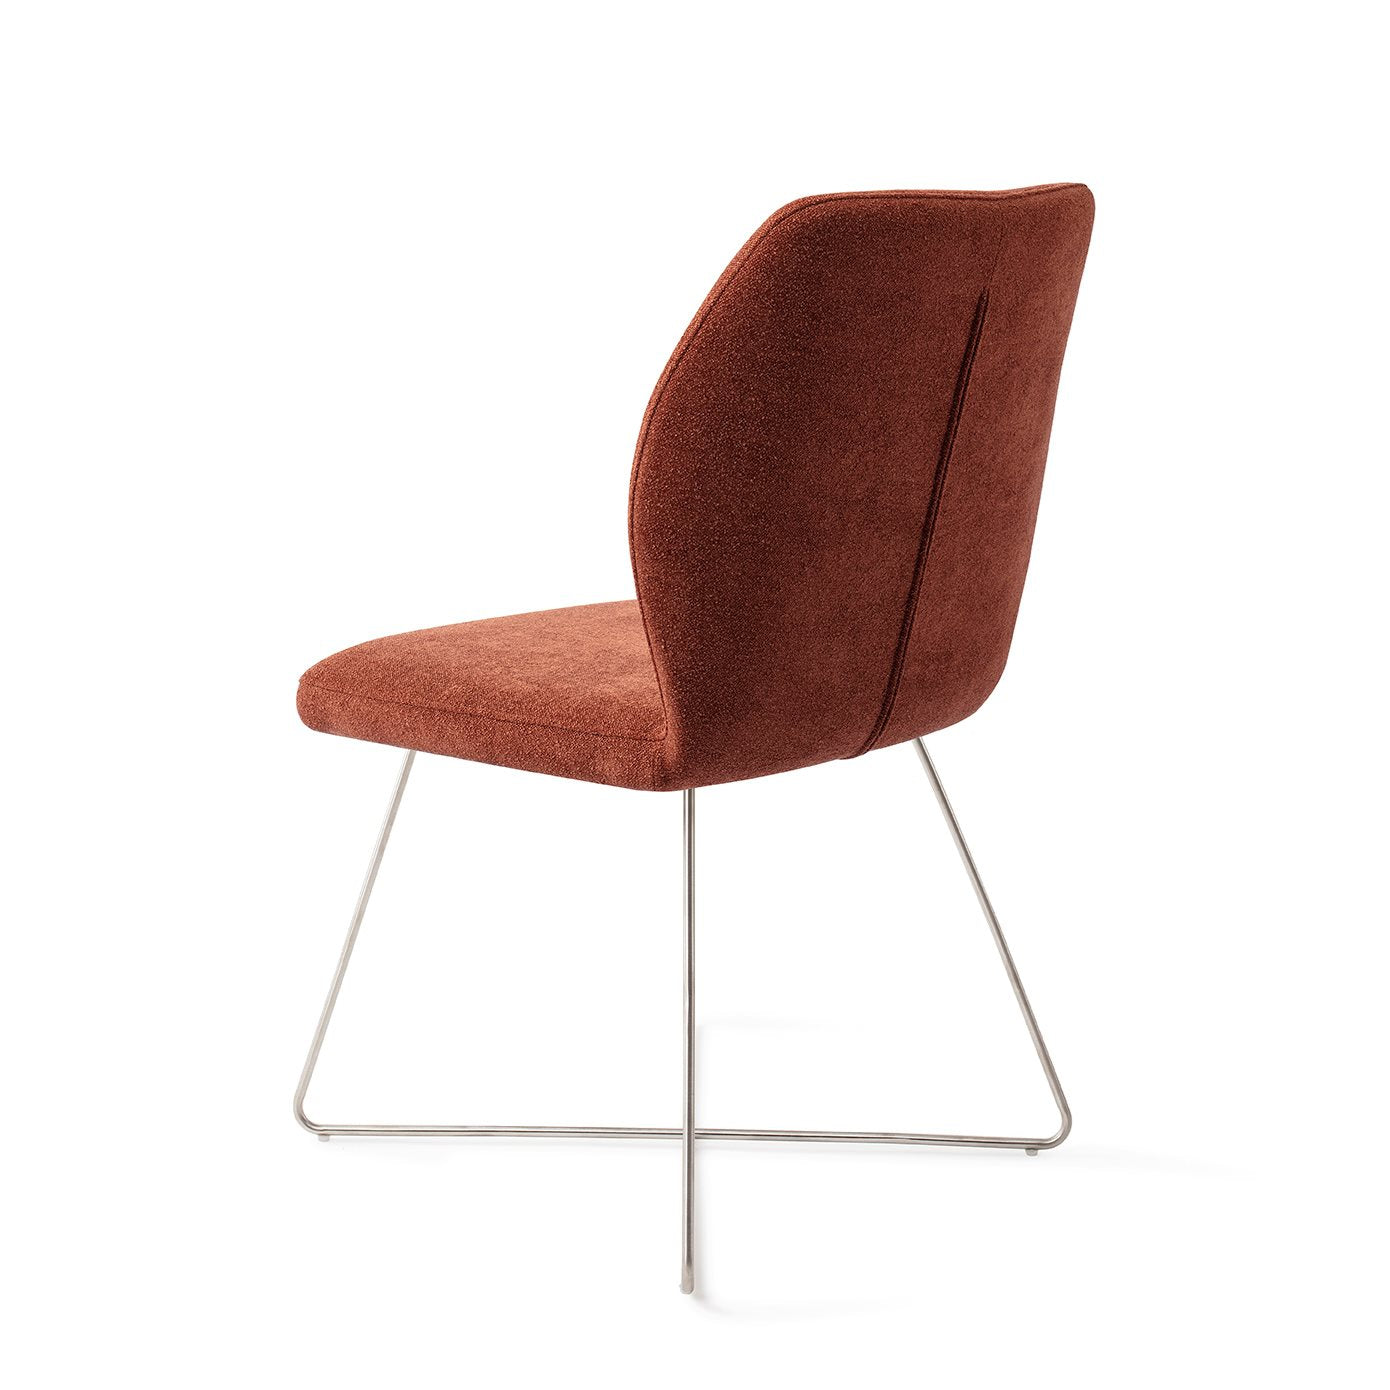 Ikata Dining Chair Cosy Copper Cross Steel